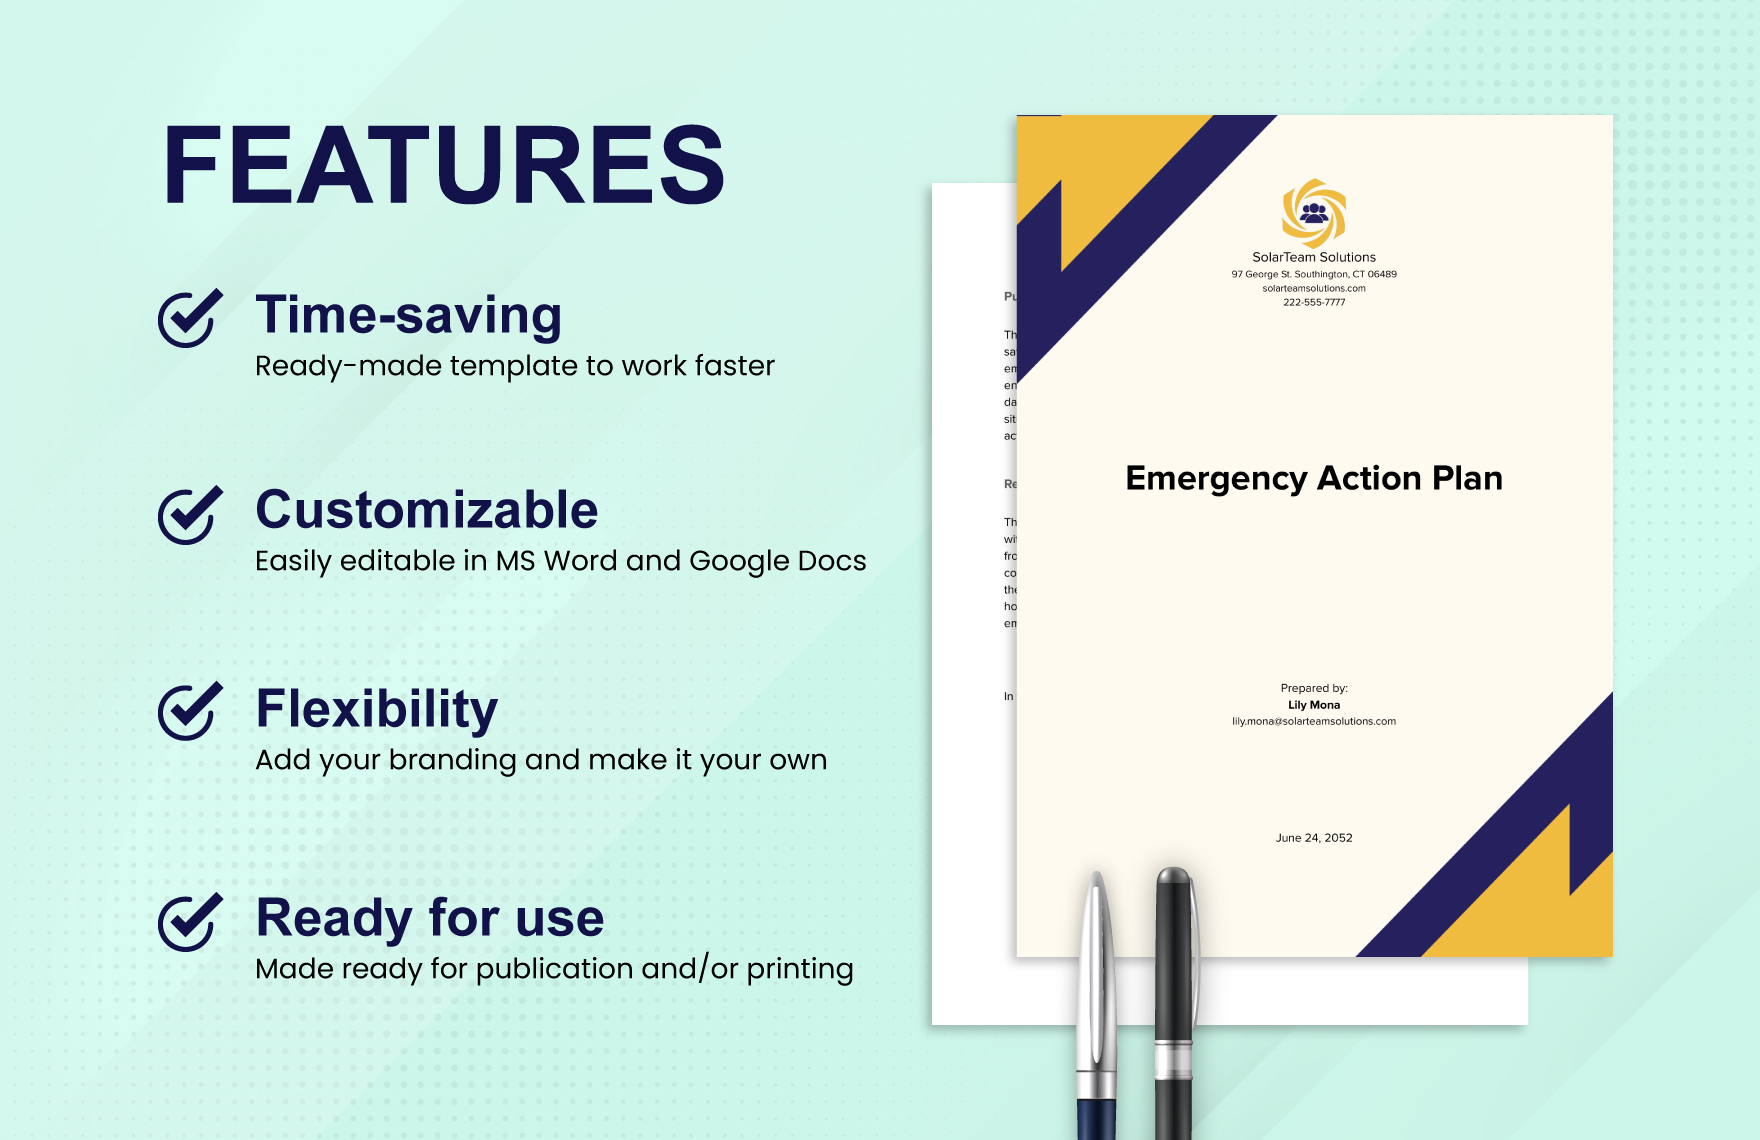 Basic Emergency Action Plan Template